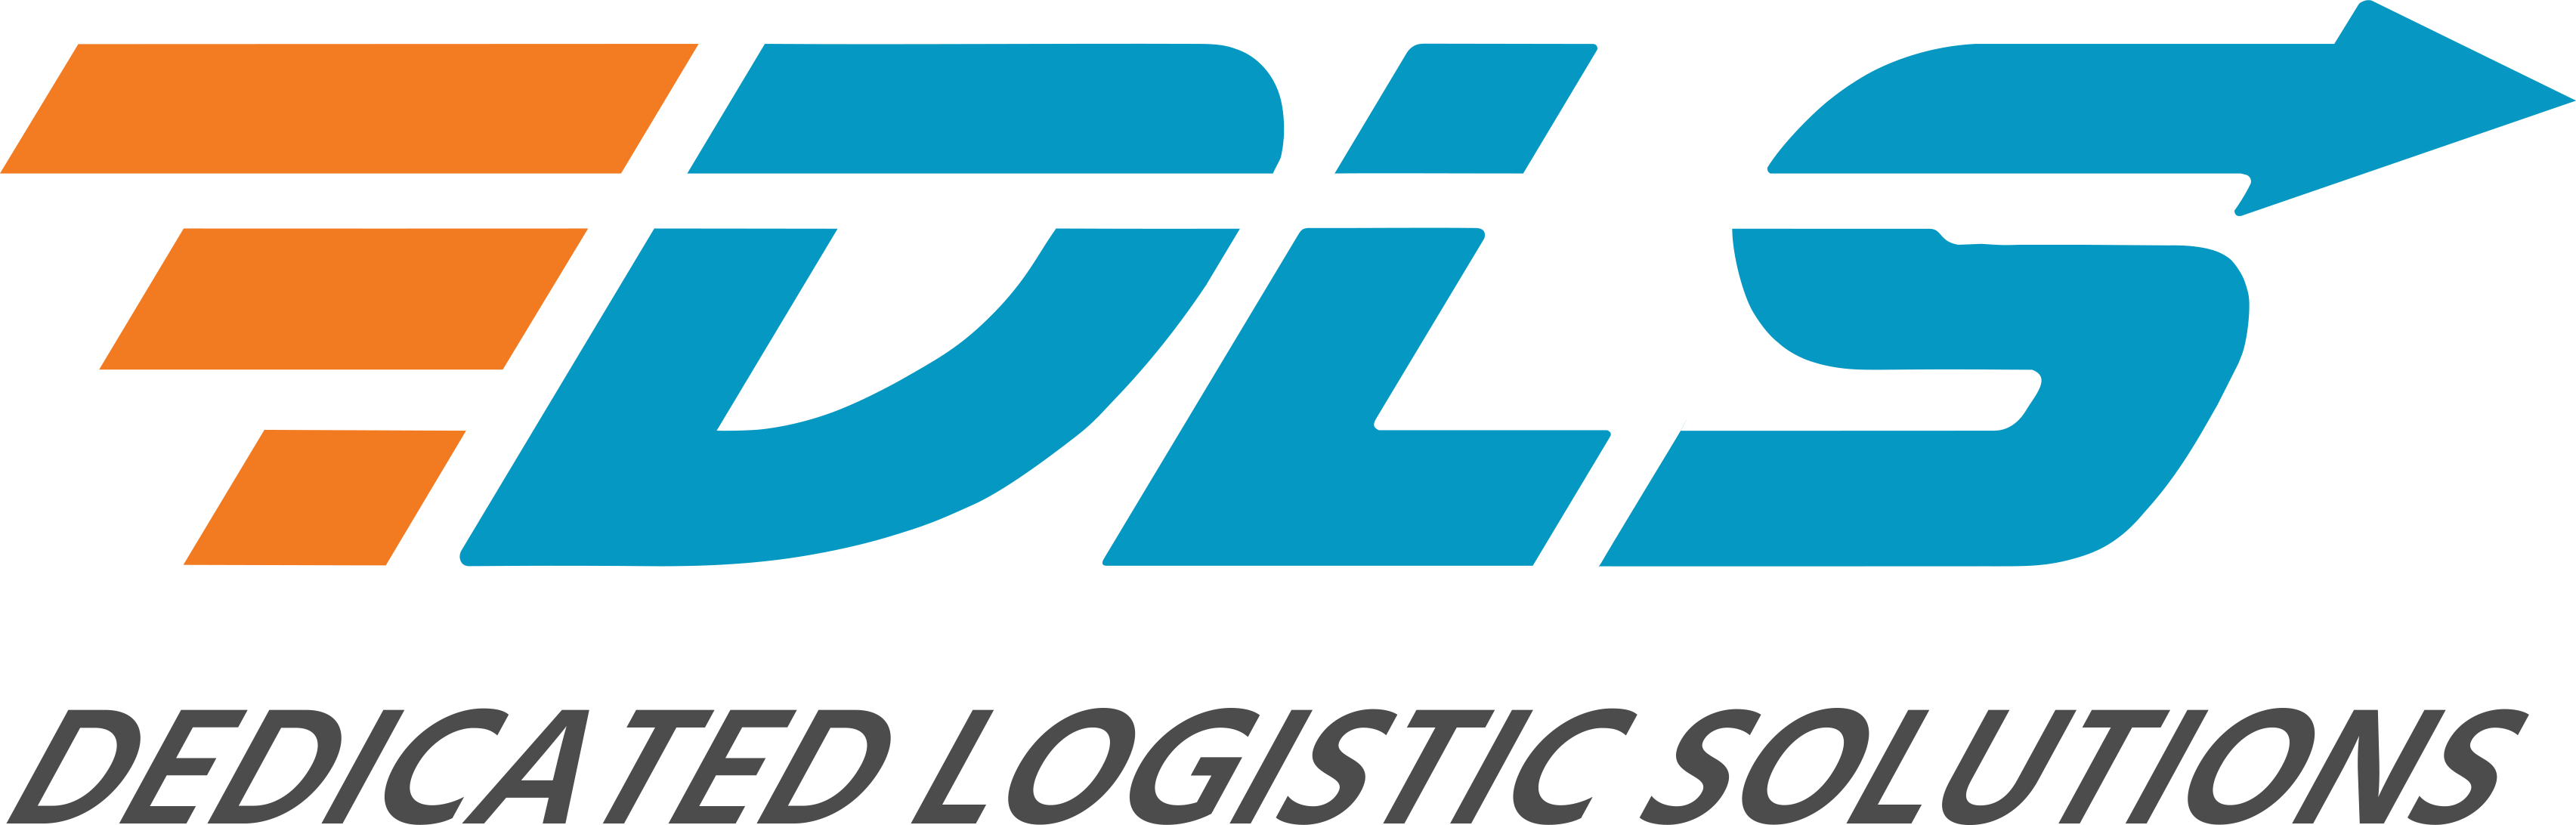 Dedicated Logistic Solutions